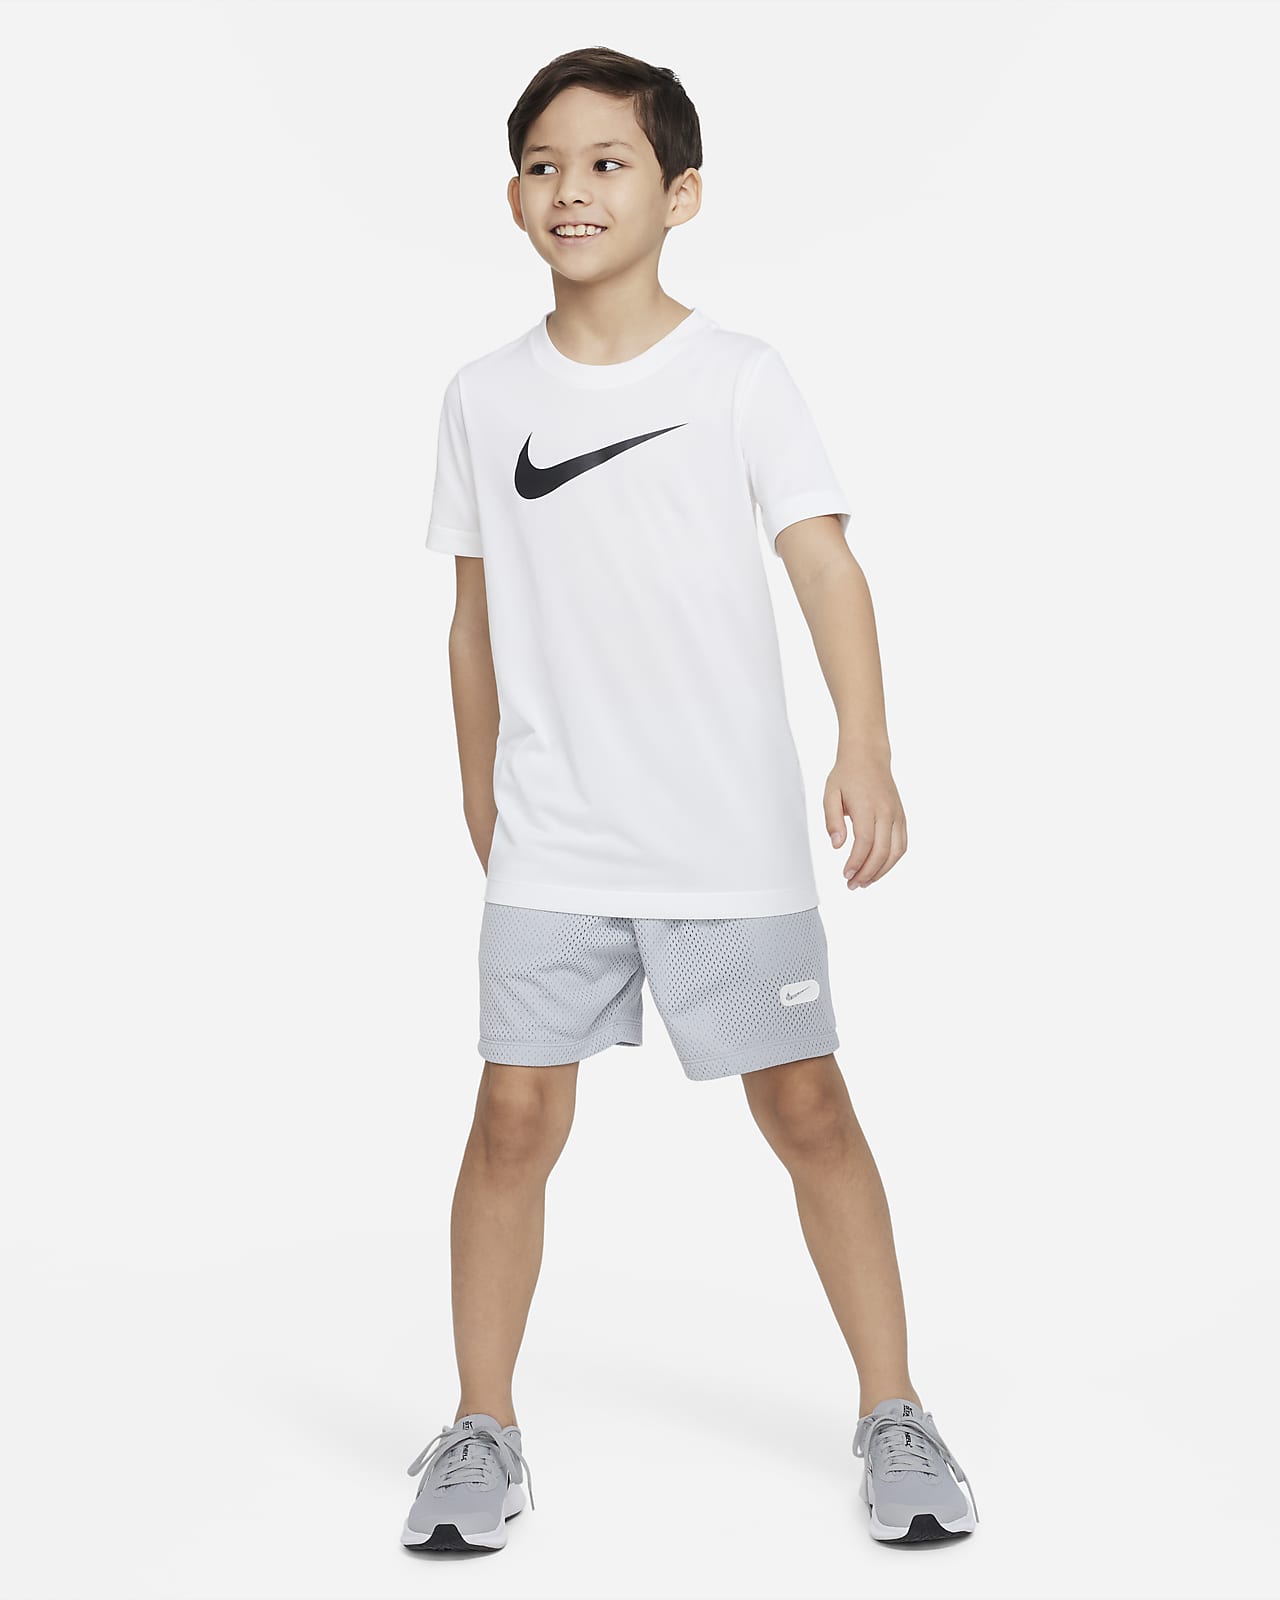  Nike 8 Dry Short Trophy, Dri-FIT Boys' training shorts, Athletic  shorts, Black/Cool Grey/Cool Grey, S : Clothing, Shoes & Jewelry